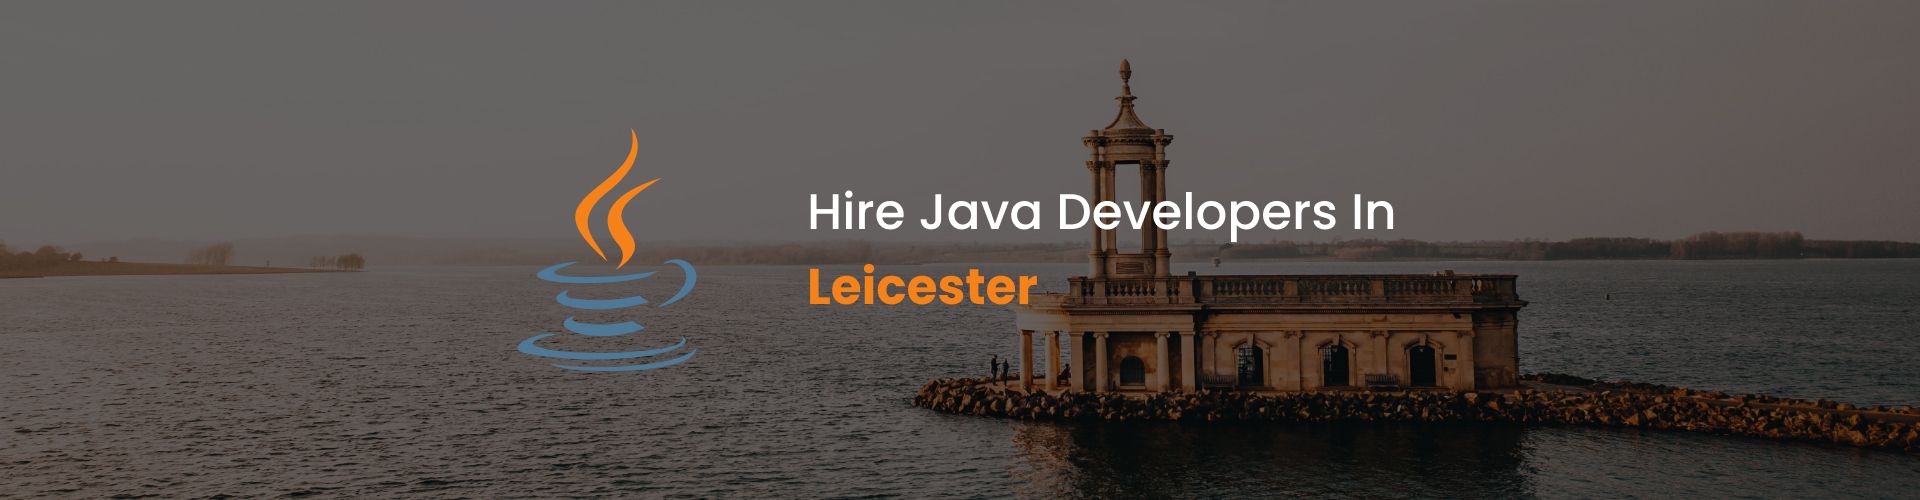 hire java developers in leicester